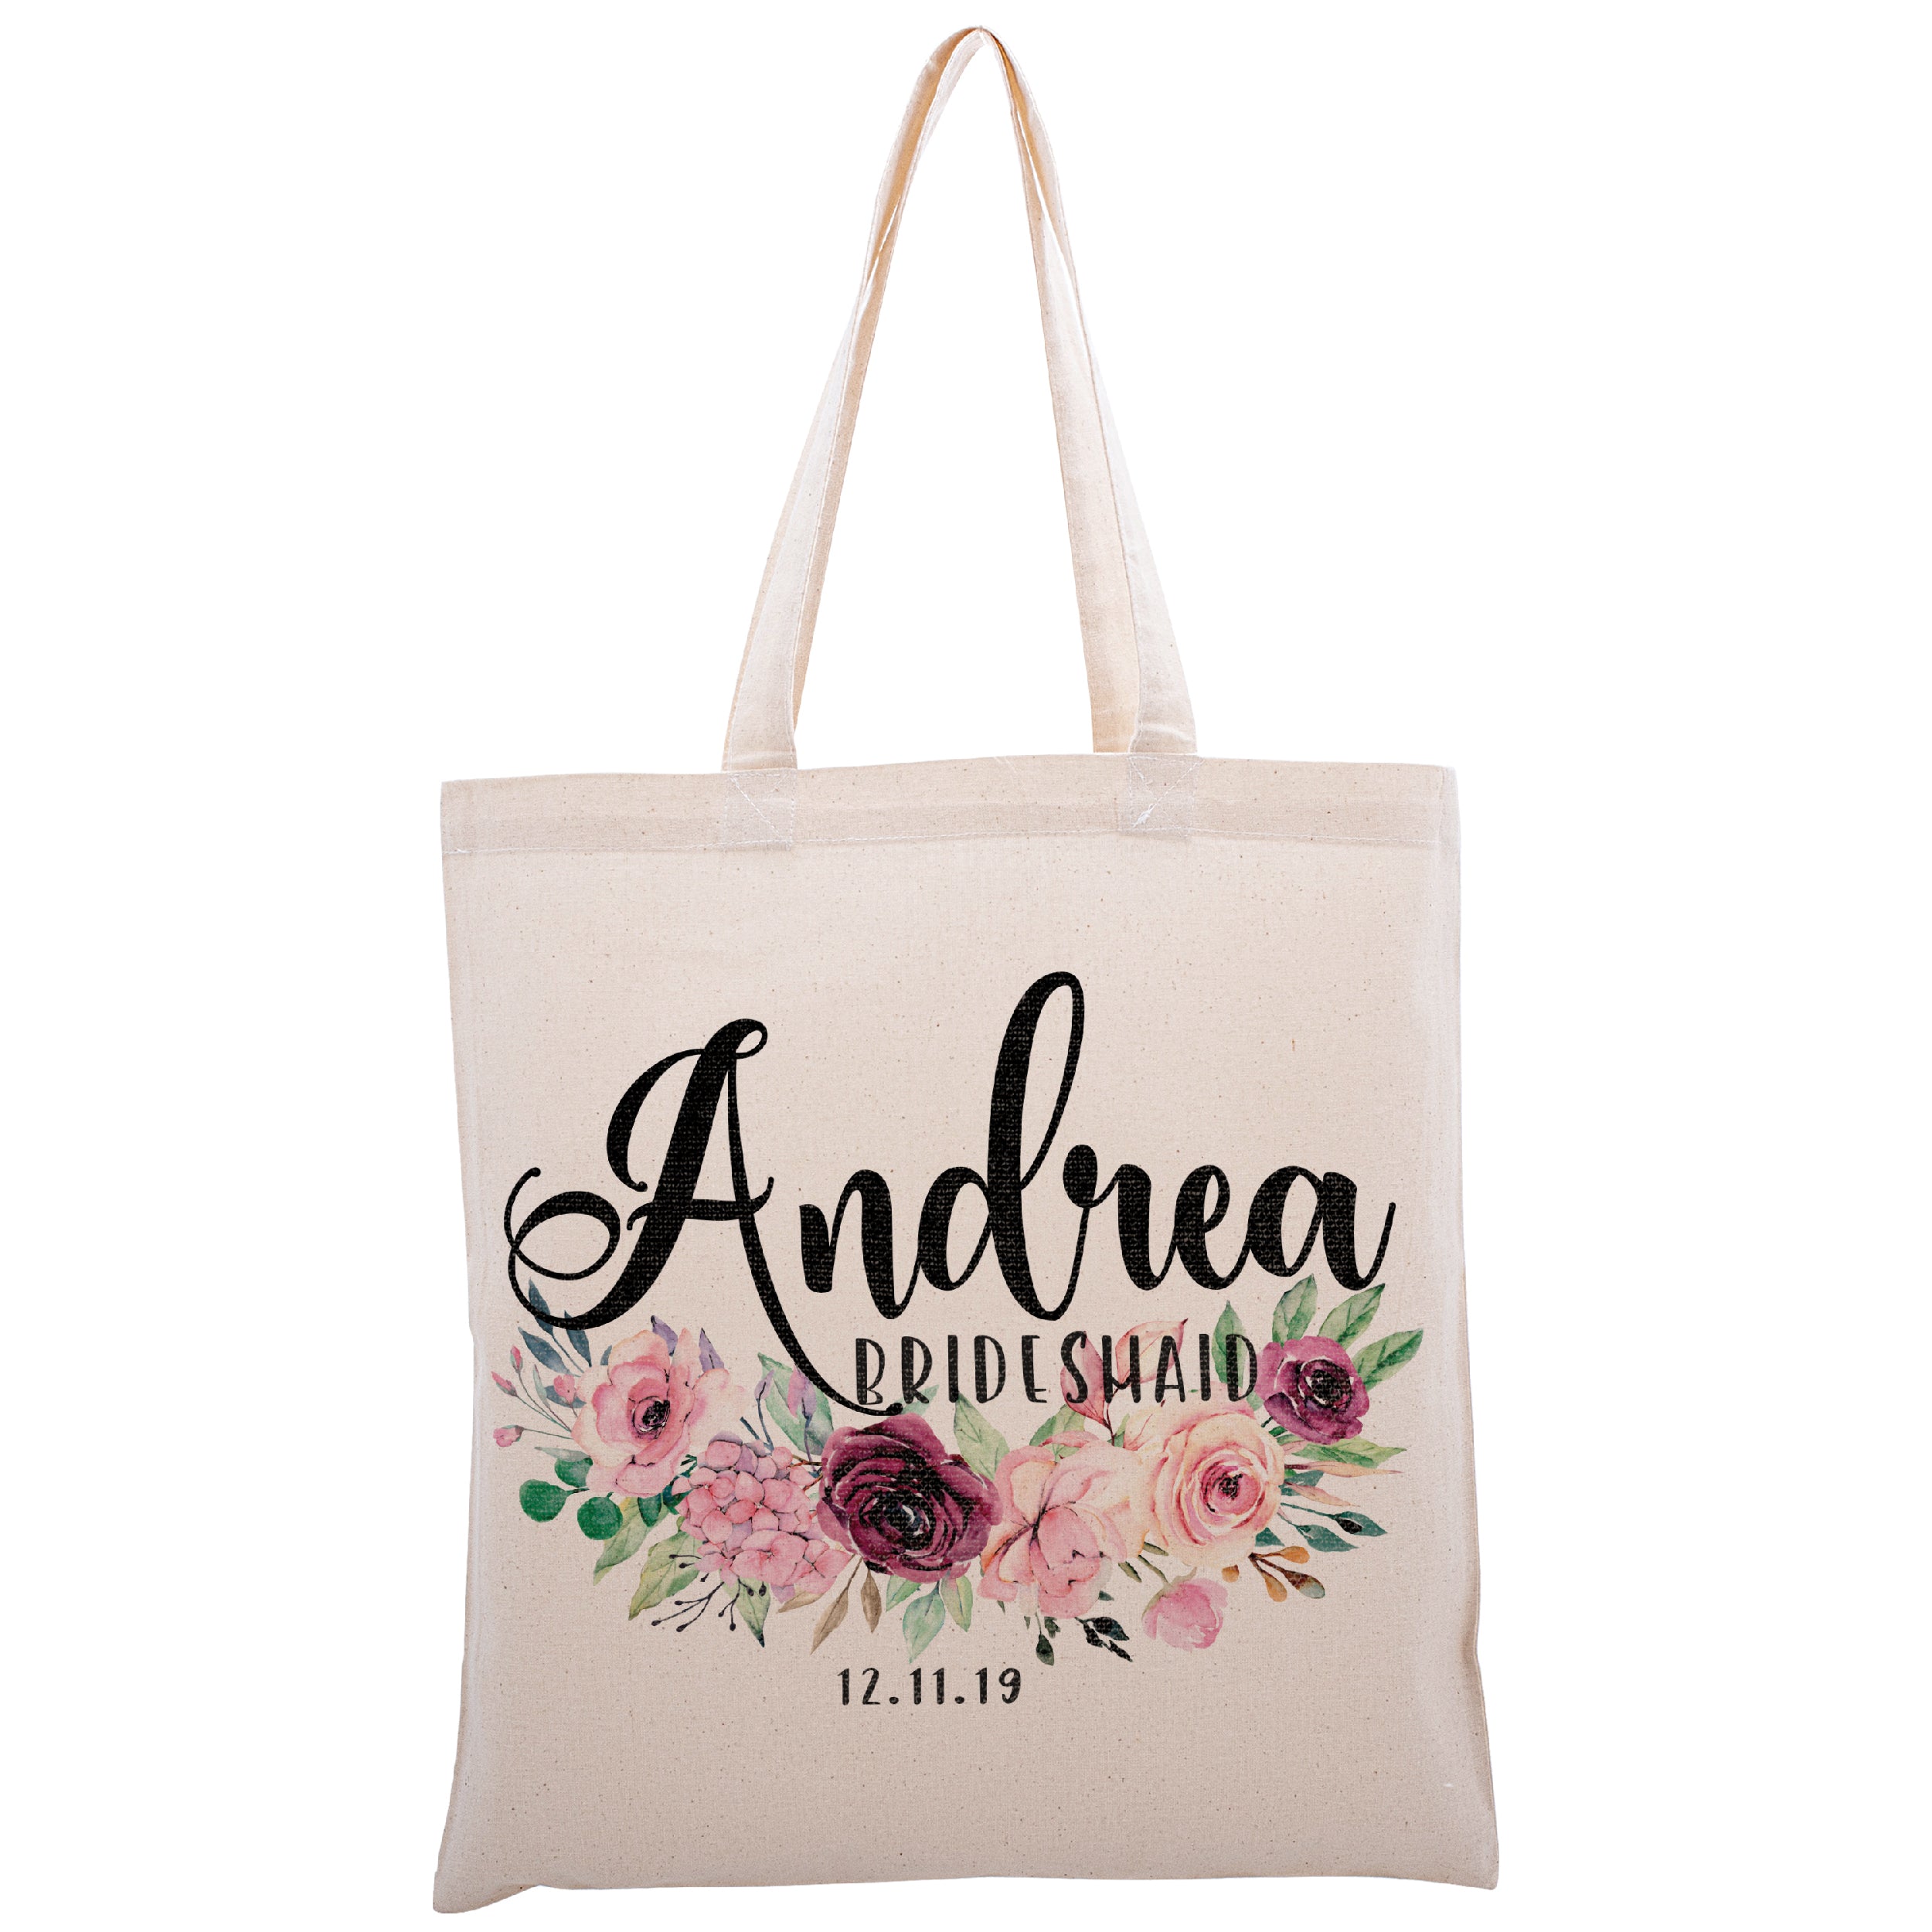 CUSTOM NAME Tote Bag Wedding Party Personalized Tote Bag 